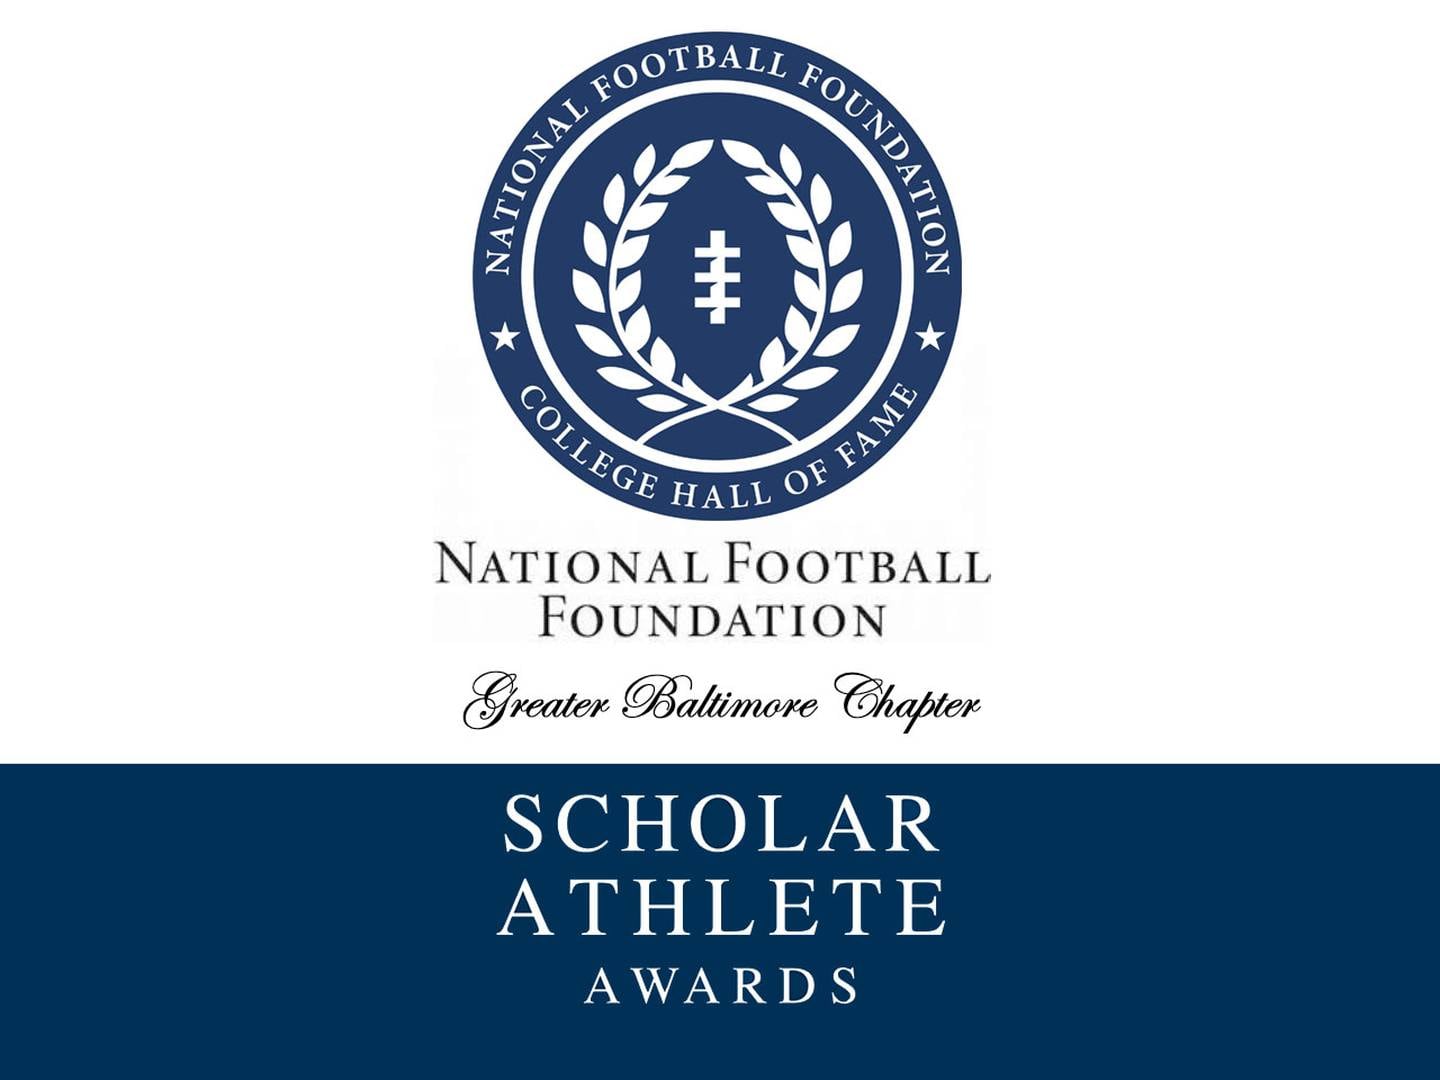 The 60th annual editor of the Baltimore Chapter of the National Football Foundation and College Hall of Fame Scholar Athlete Awards return to an in-person format for the first time since the pandemic, on March 15th at Martin's West.